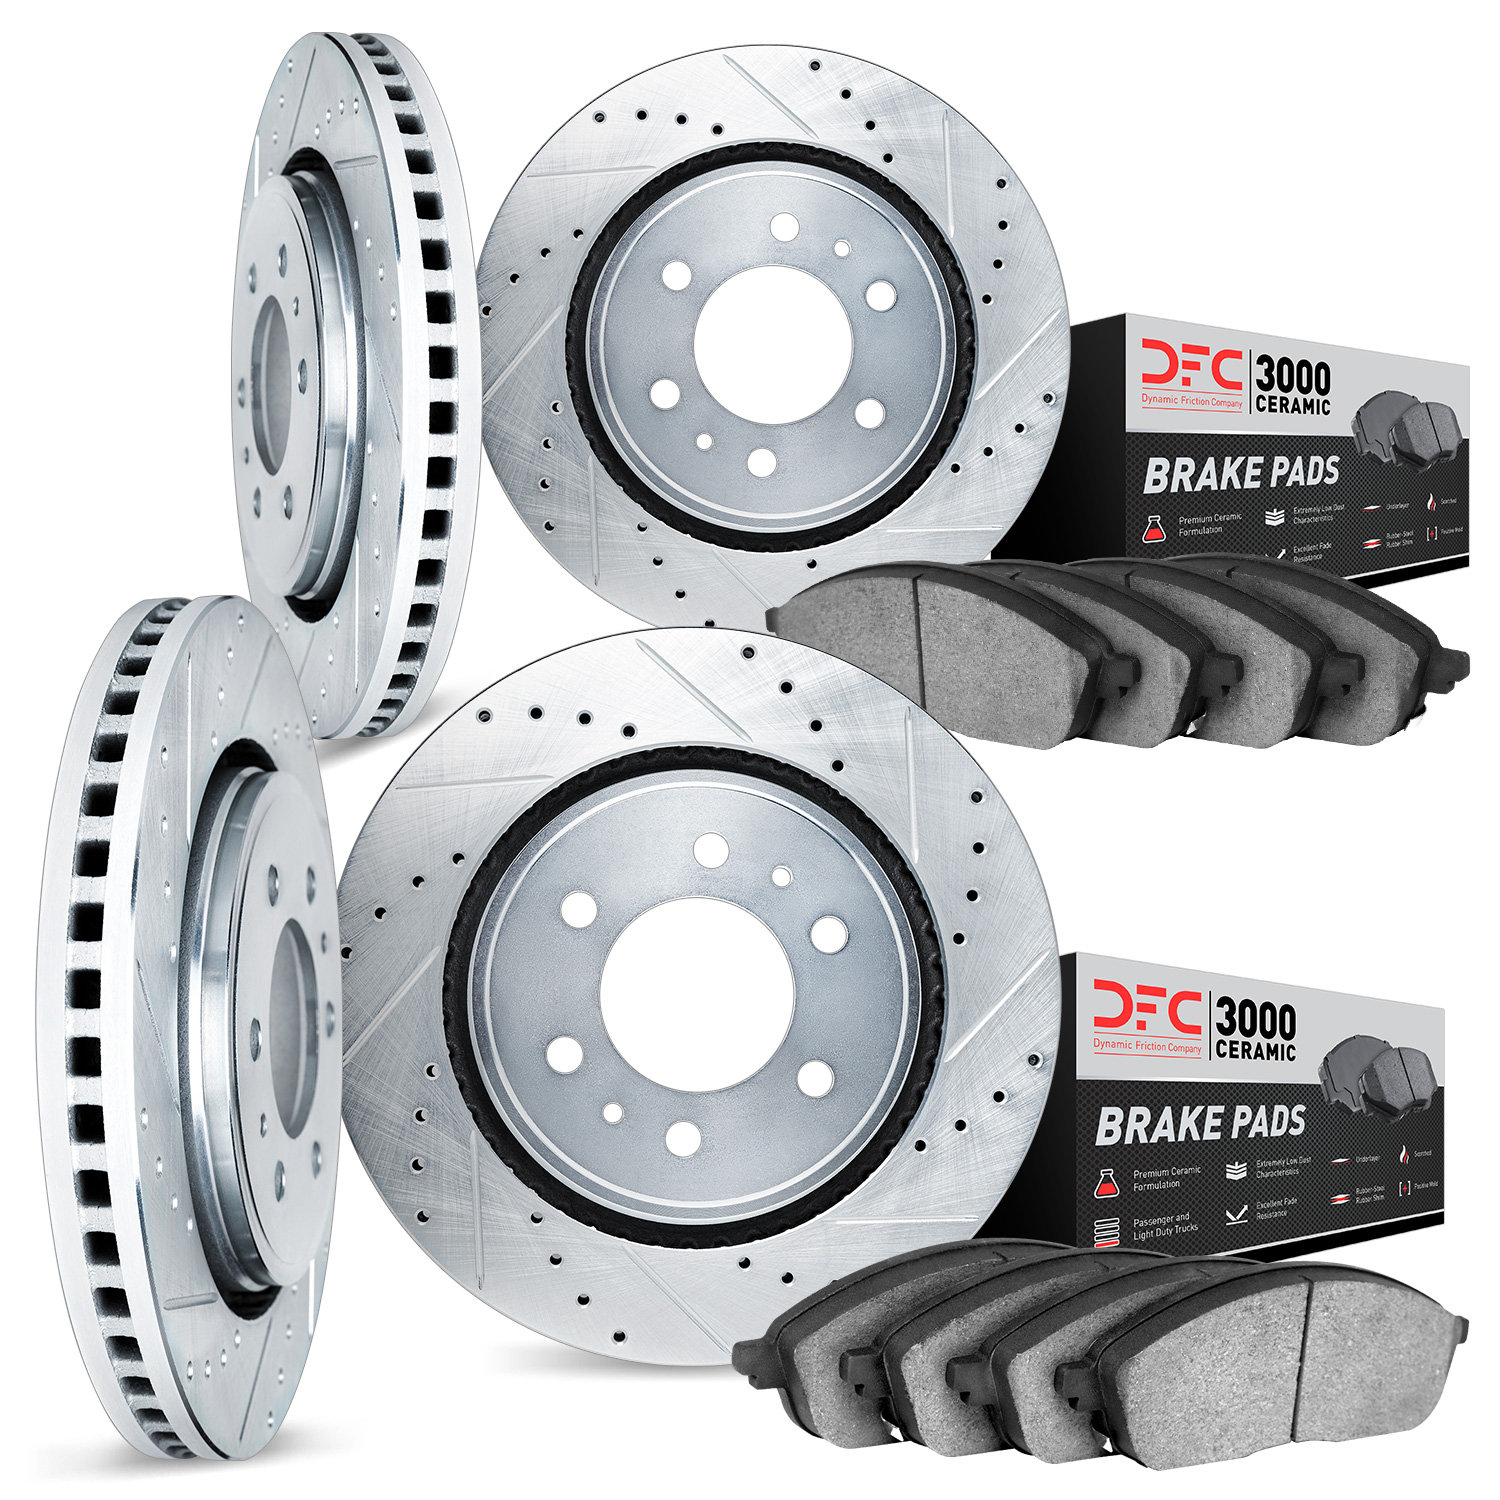 7304-54063 Drilled/Slotted Brake Rotor with 3000-Series Ceramic Brake Pads Kit [Silver], 2004-2008 Ford/Lincoln/Mercury/Mazda, P